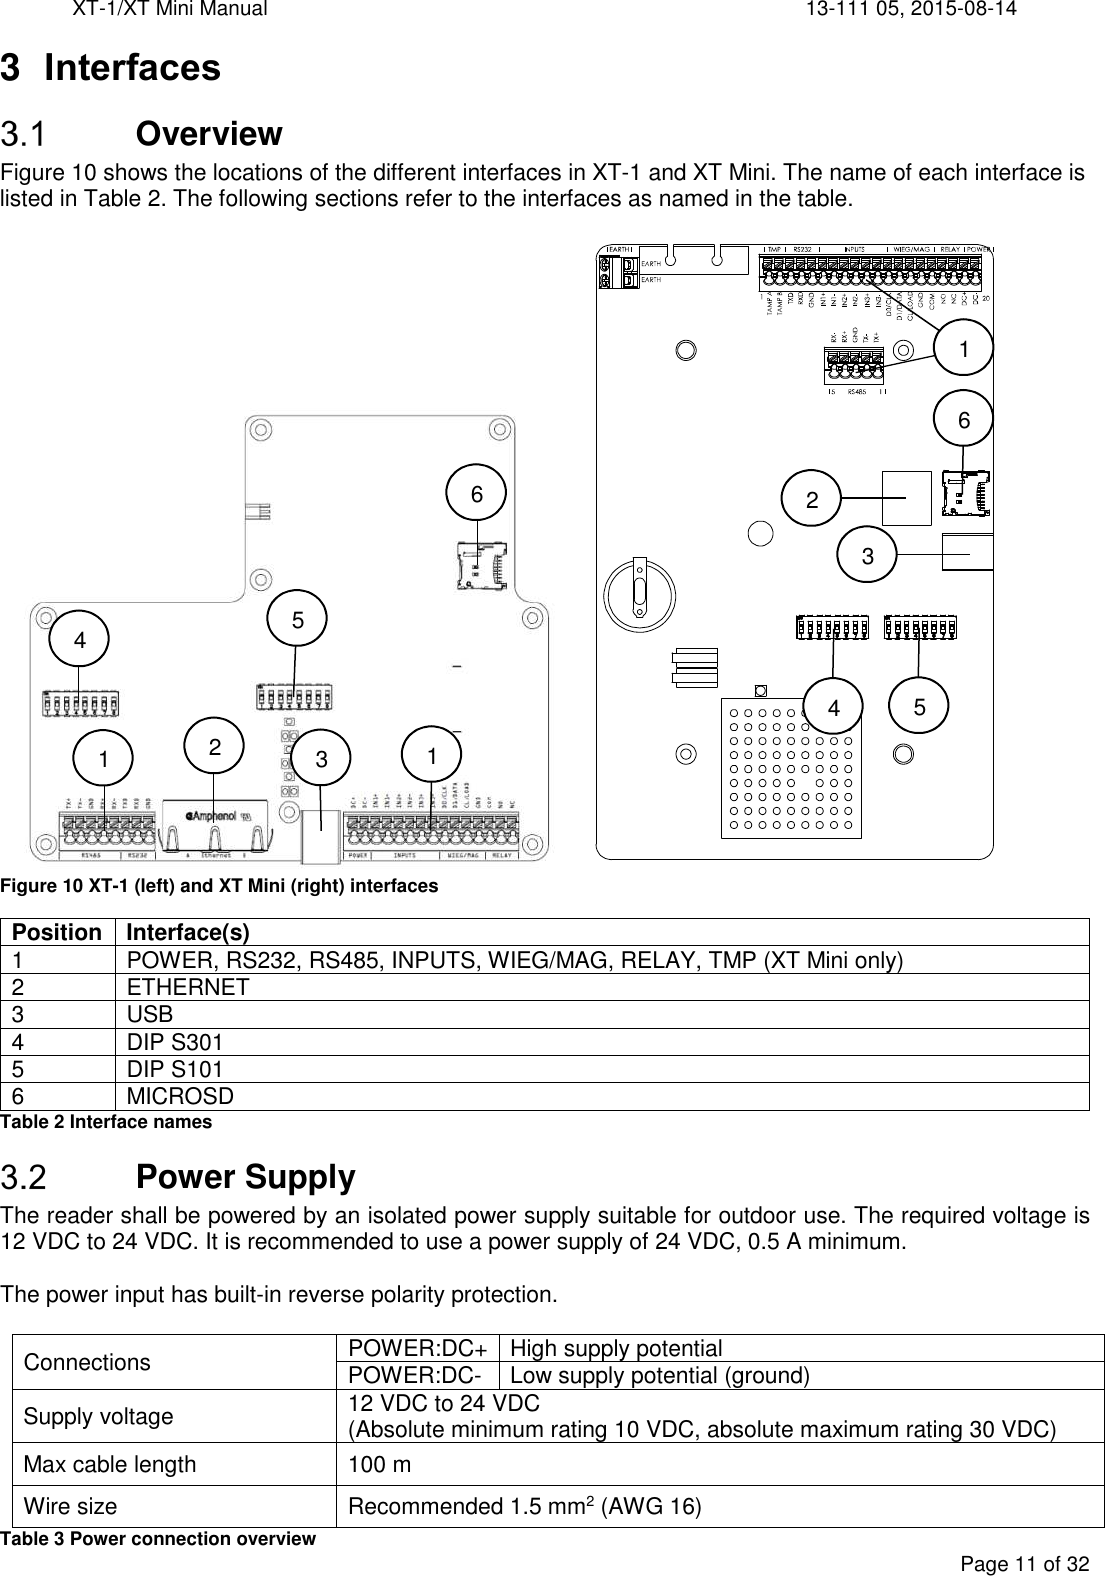 XT-1/XT Mini Manual     13-111 05, 2015-08-14  Page 11 of 32  3  Interfaces  Overview Figure 10 shows the locations of the different interfaces in XT-1 and XT Mini. The name of each interface is listed in Table 2. The following sections refer to the interfaces as named in the table.        Figure 10 XT-1 (left) and XT Mini (right) interfaces Position Interface(s) 1  POWER, RS232, RS485, INPUTS, WIEG/MAG, RELAY, TMP (XT Mini only) 2  ETHERNET 3  USB 4  DIP S301 5  DIP S101 6  MICROSD Table 2 Interface names  Power Supply The reader shall be powered by an isolated power supply suitable for outdoor use. The required voltage is 12 VDC to 24 VDC. It is recommended to use a power supply of 24 VDC, 0.5 A minimum.  The power input has built-in reverse polarity protection.  Connections  POWER:DC+ High supply potential POWER:DC-  Low supply potential (ground) Supply voltage  12 VDC to 24 VDC  (Absolute minimum rating 10 VDC, absolute maximum rating 30 VDC) Max cable length  100 m Wire size  Recommended 1.5 mm2 (AWG 16) Table 3 Power connection overview 1 3 2 6 4 5 1 6 5 4 1 2 3 